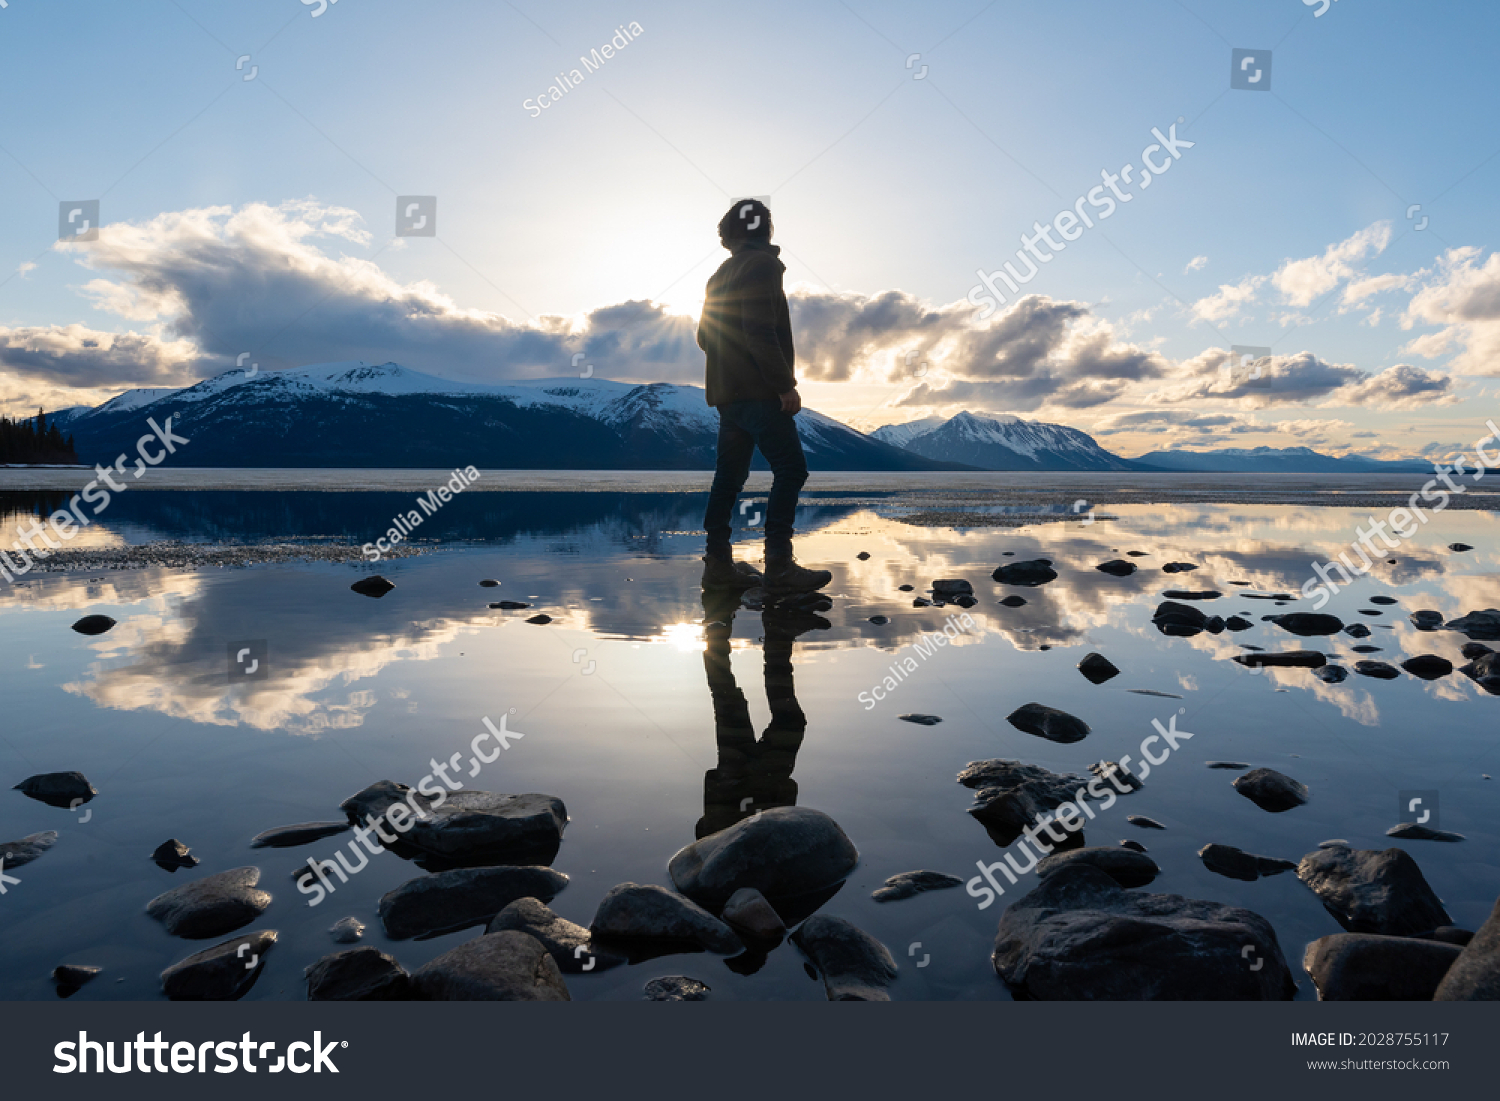 Silhouette of a man standing on a rocky lakeshore in northern Canada with reflection in calm lake below, dramatic clouds and blue sky.  #2028755117